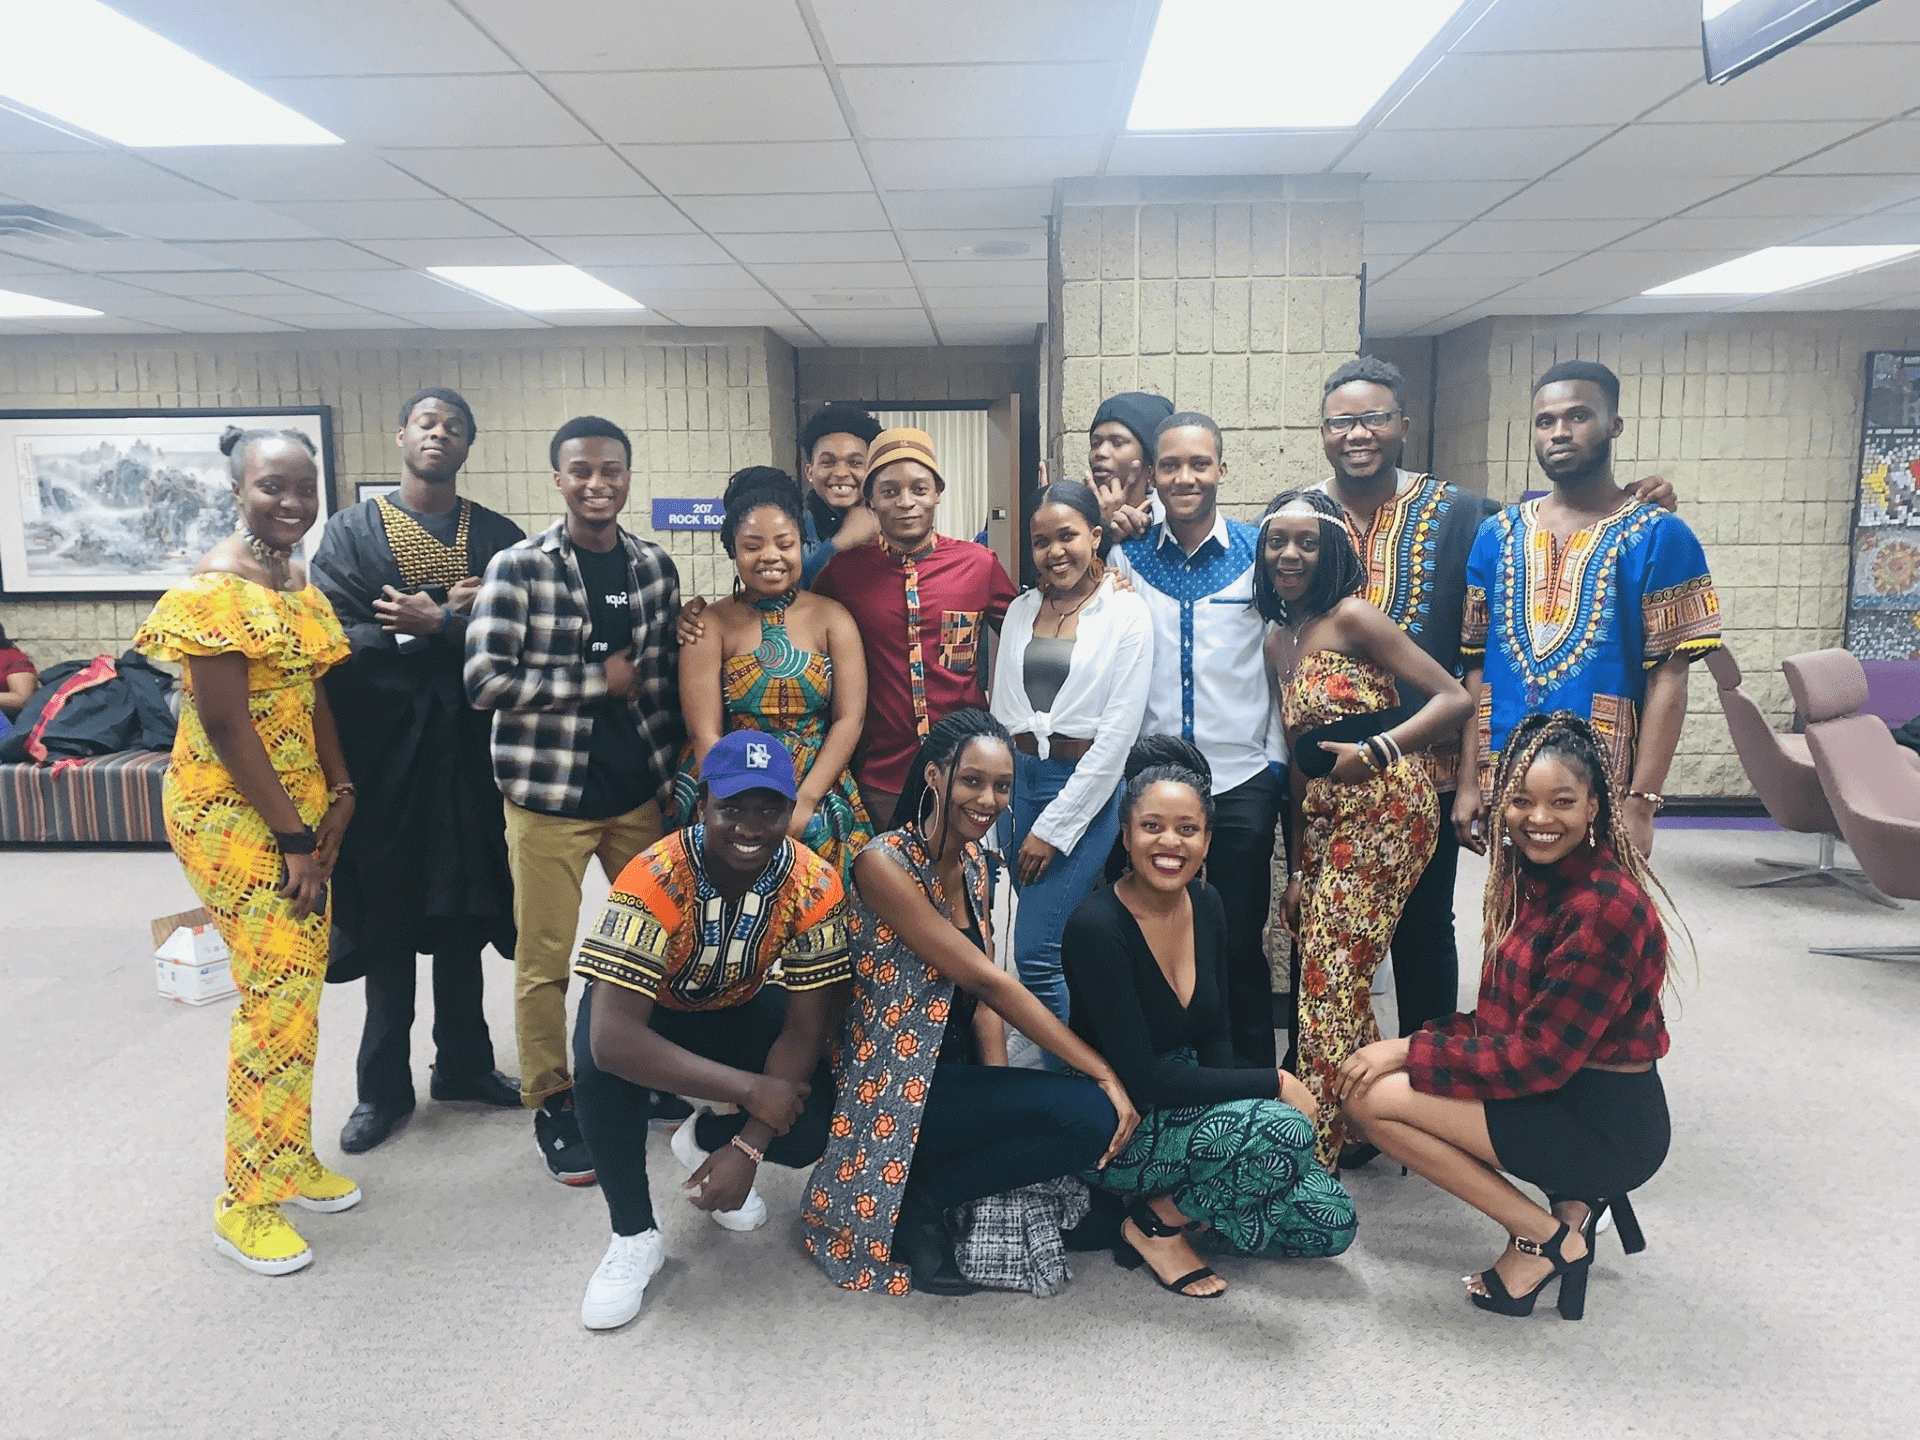 Tebogo pictured with the African Student Club